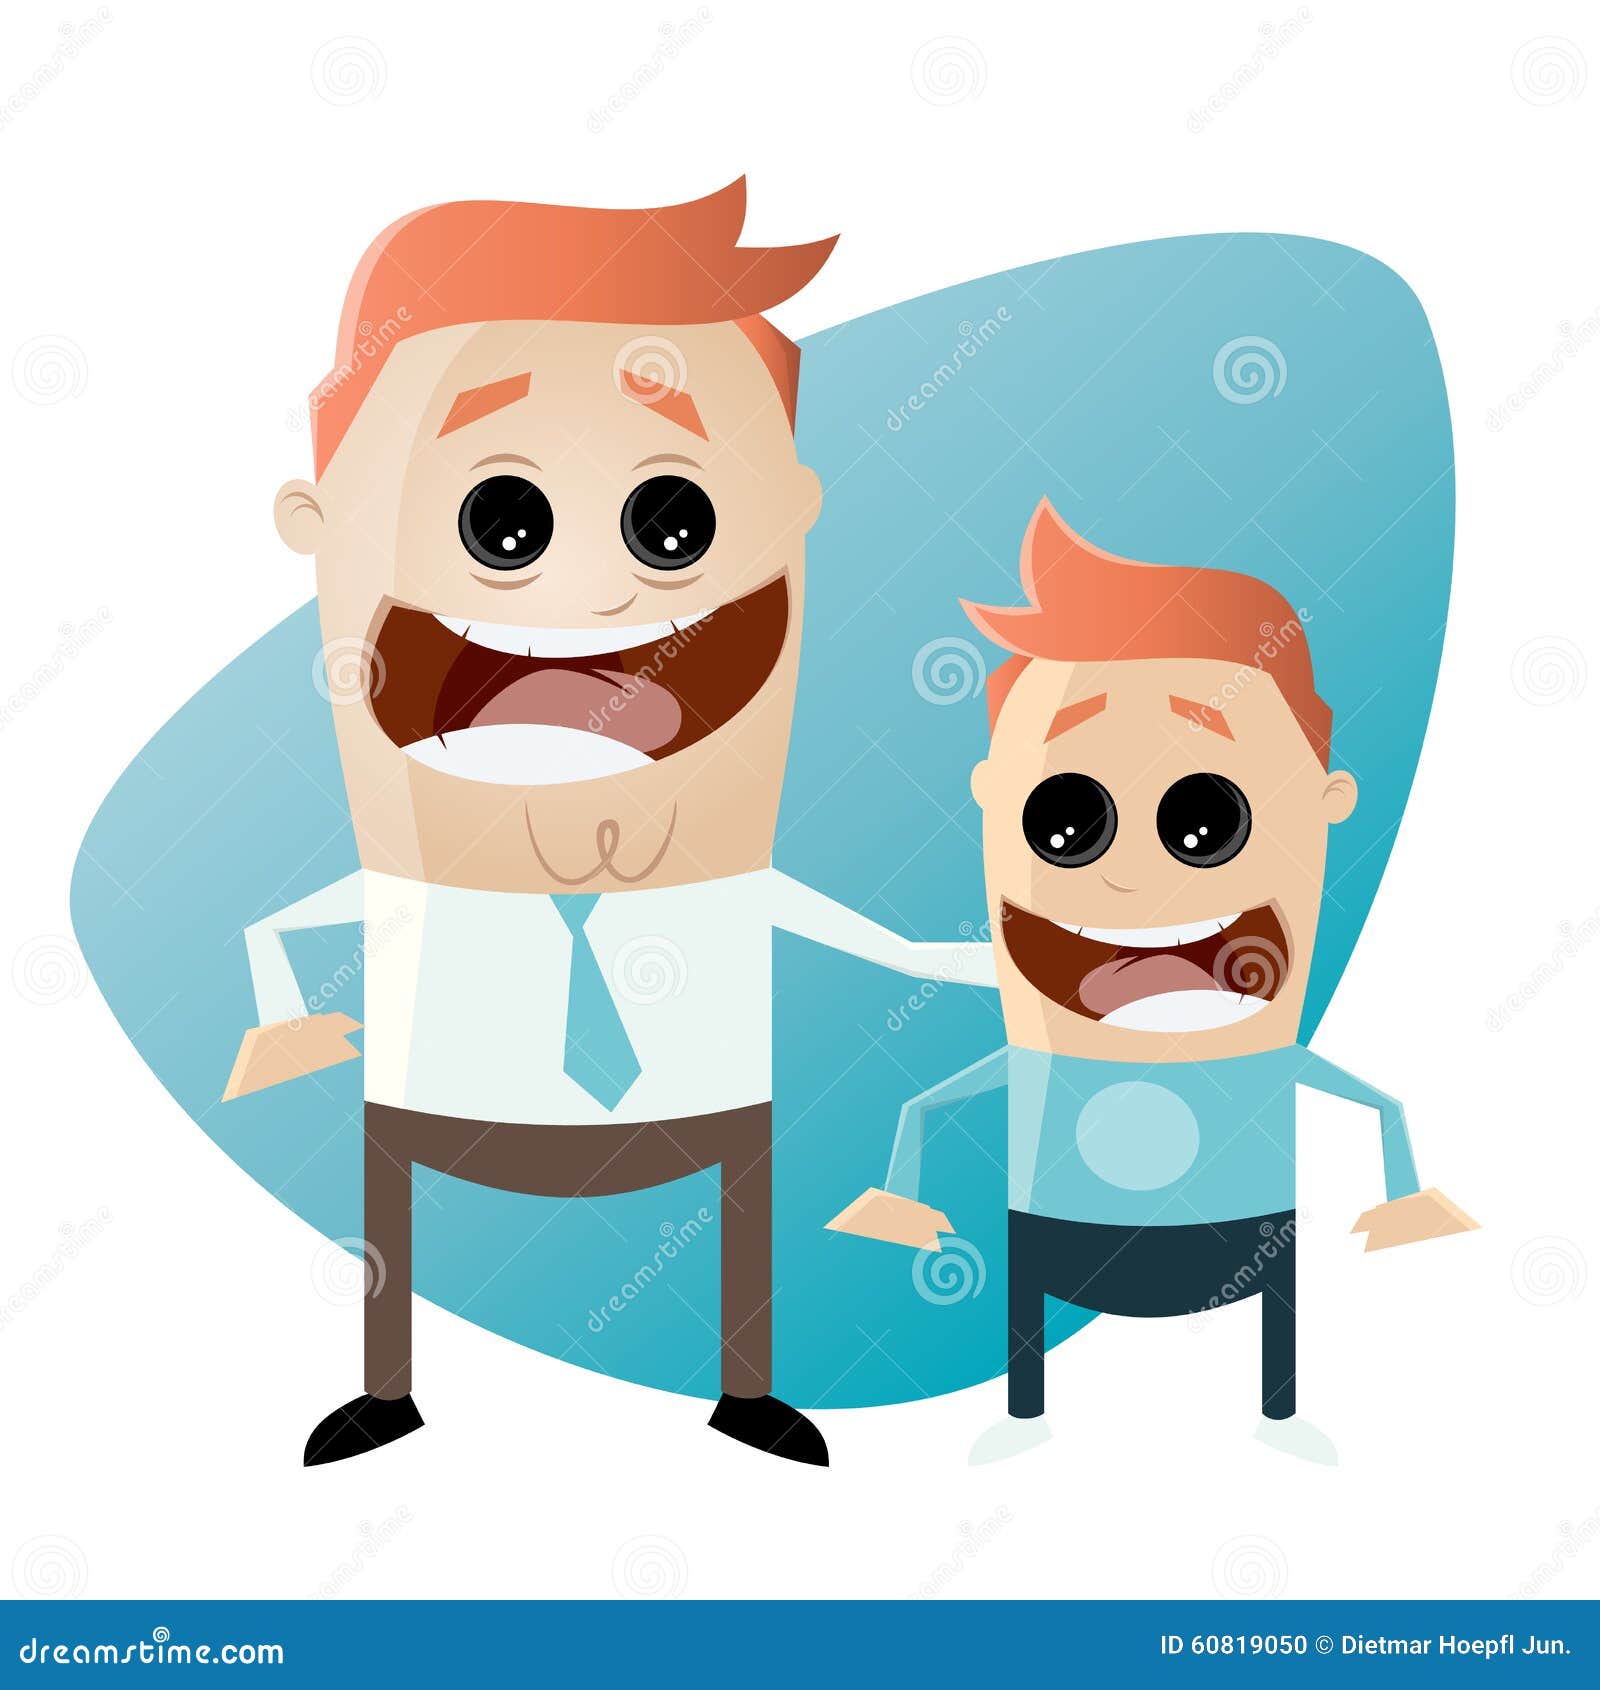 Cartoon Father And Son Stock Vector - Image: 60819050